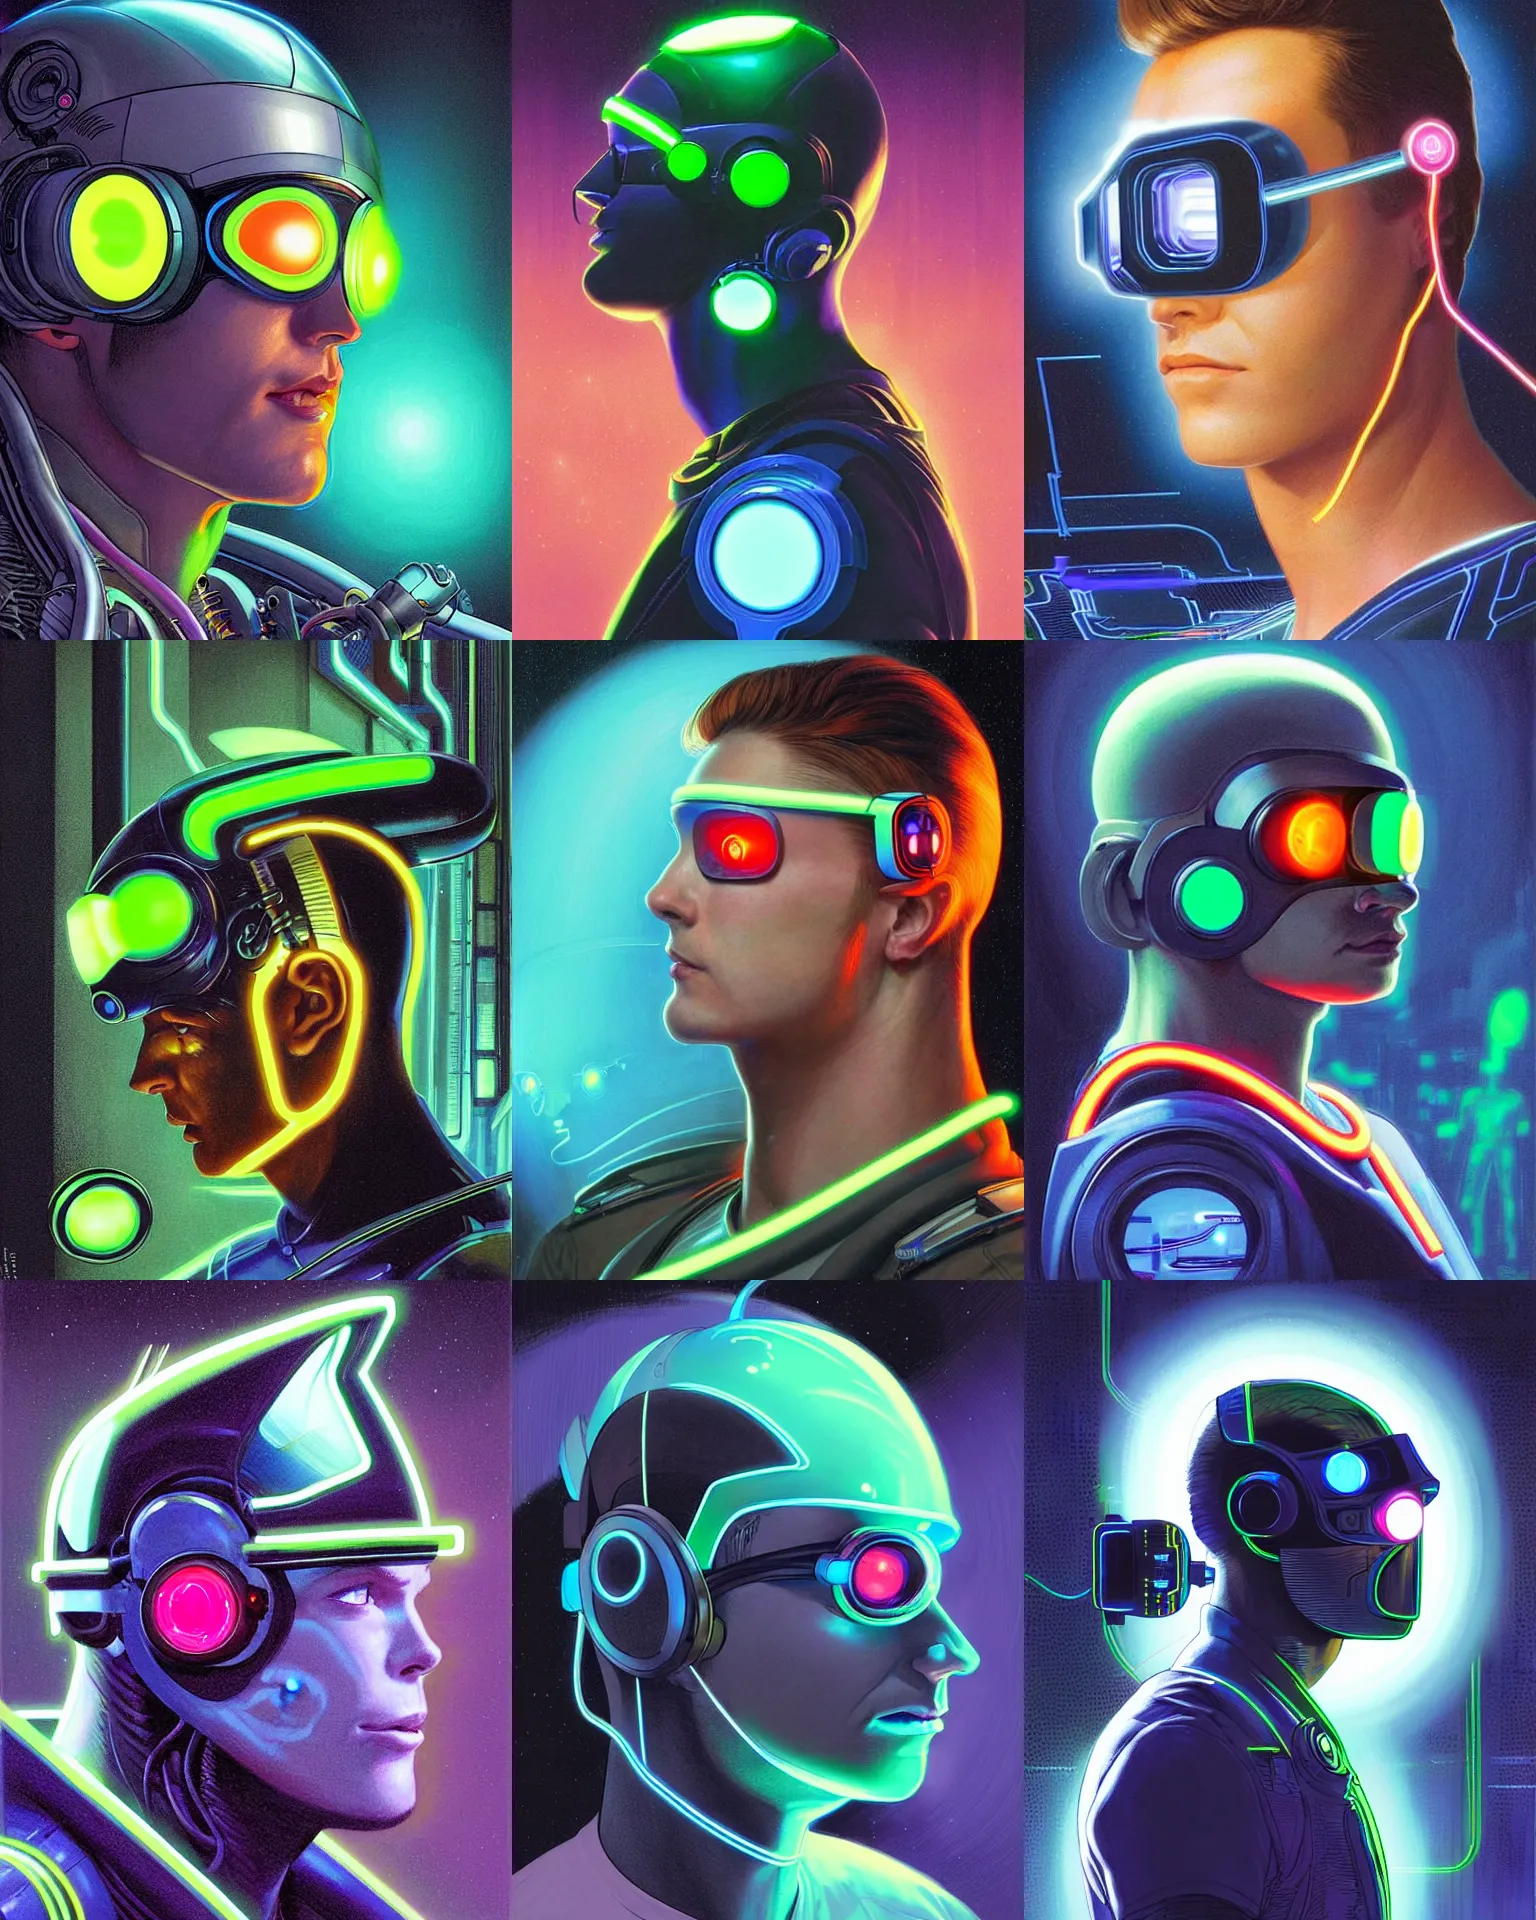 Prompt: sillouete side view future coder man, sleek cyclops display over eyes and glowing headset, neon accents, holographic colors, desaturated headshot portrait digital painting by philip coles, ivan bilibin, dean cornwall, donato giancola, john berkey, astronaut cyberpunk electric lights profile